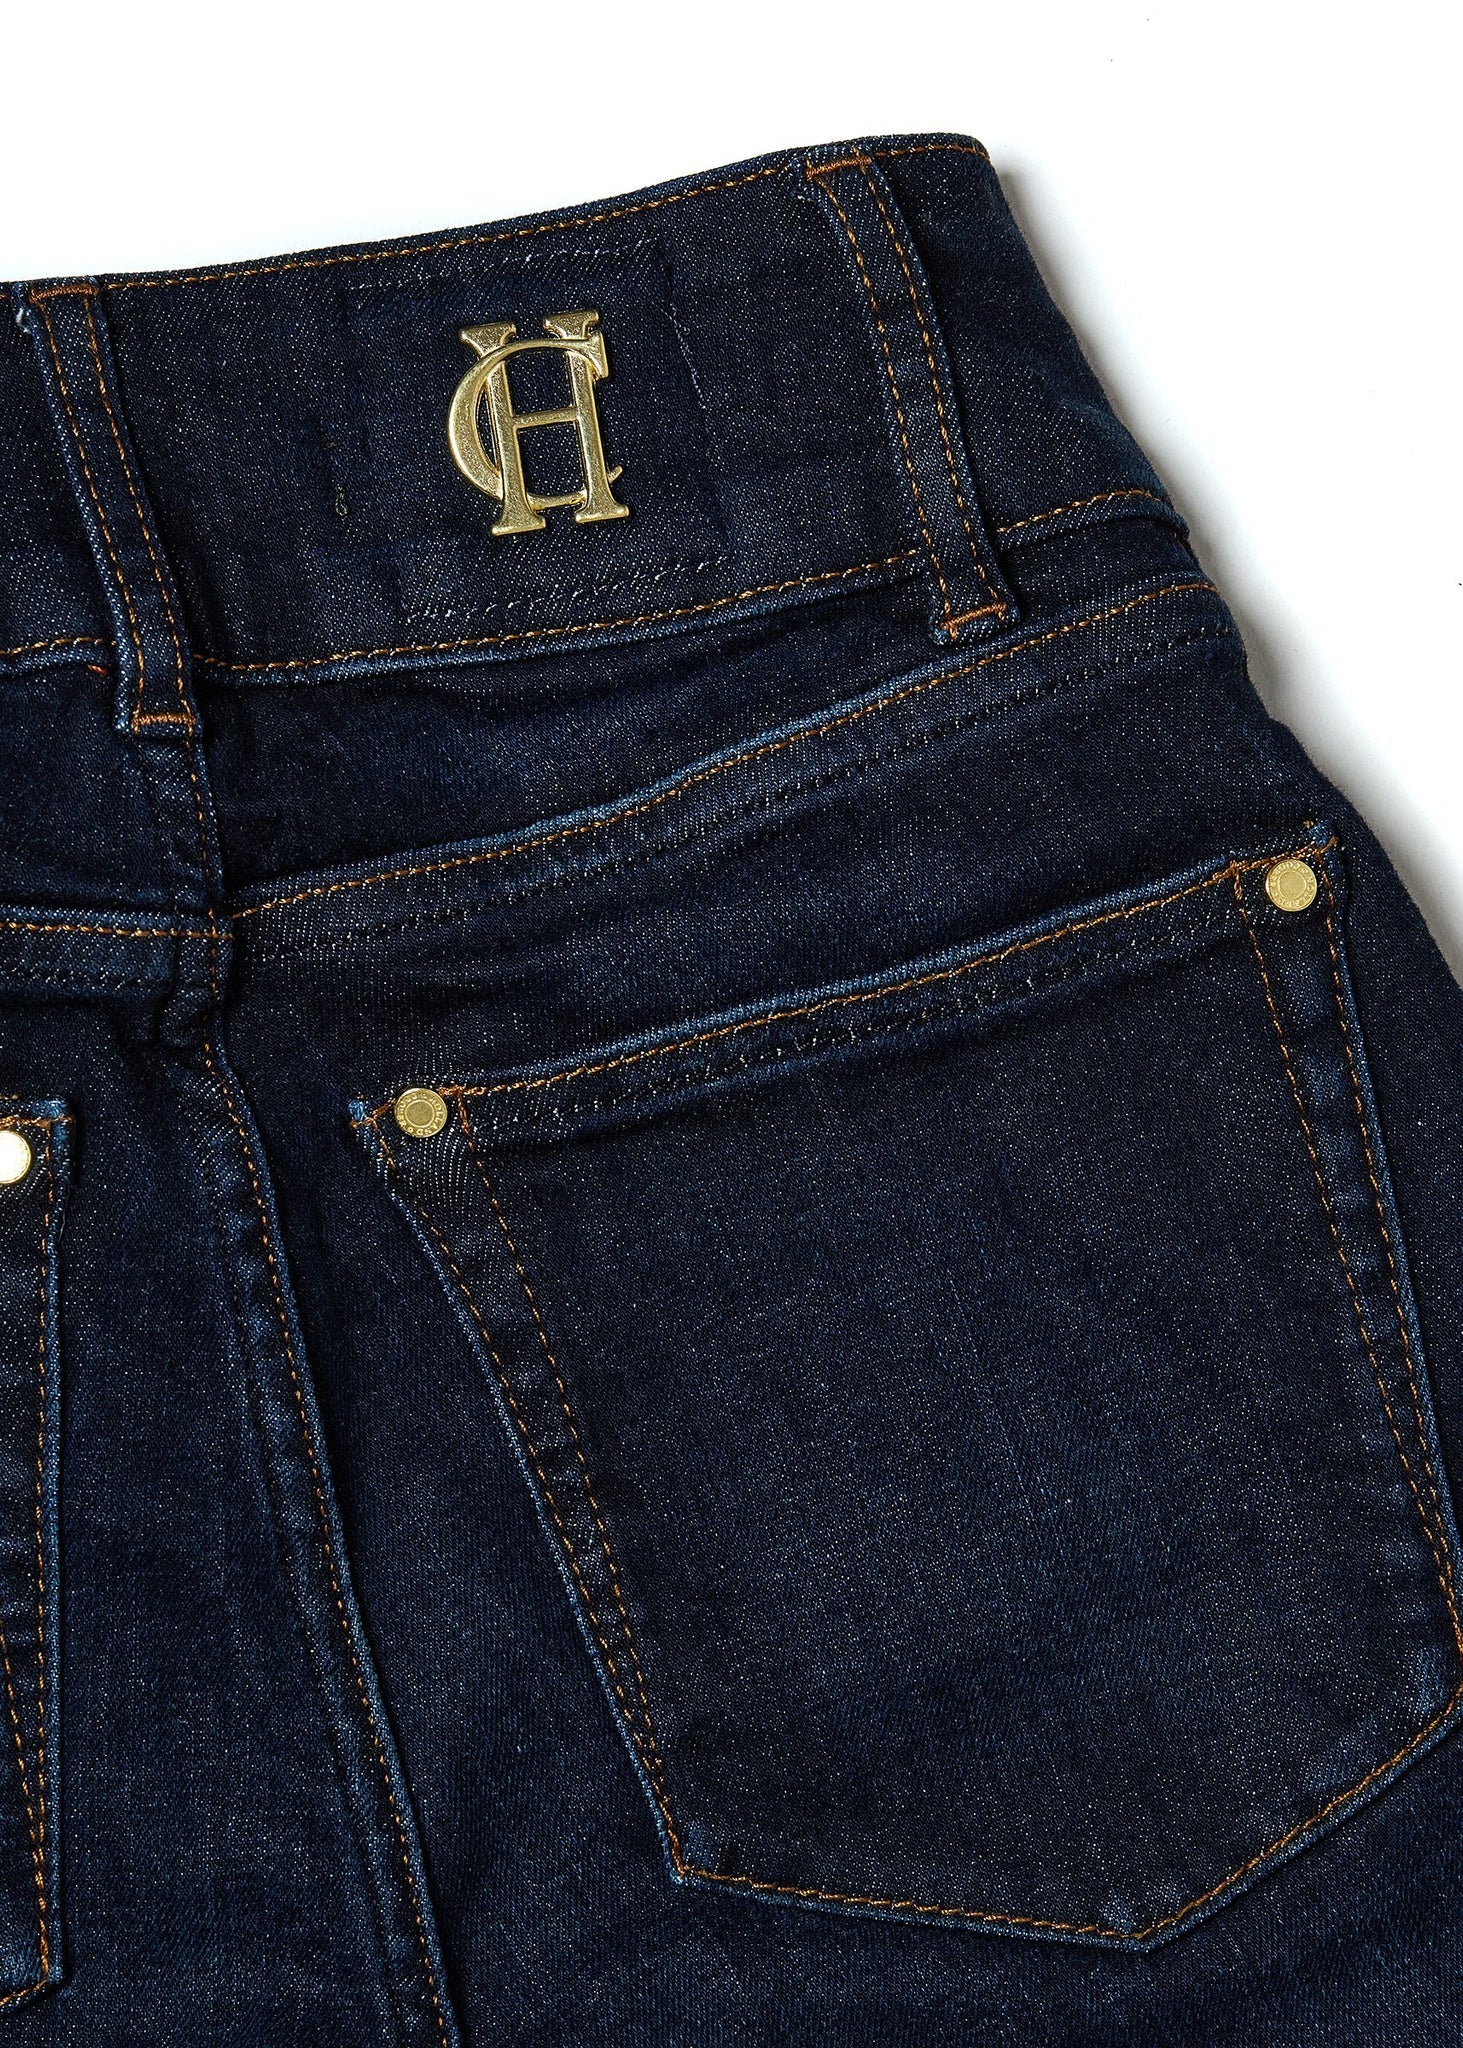 back pocket detail on womens high rise dark blue denim flared jean with centre front zip fly fastening with two open pockets at the front and back with gold hardware on back waistband 